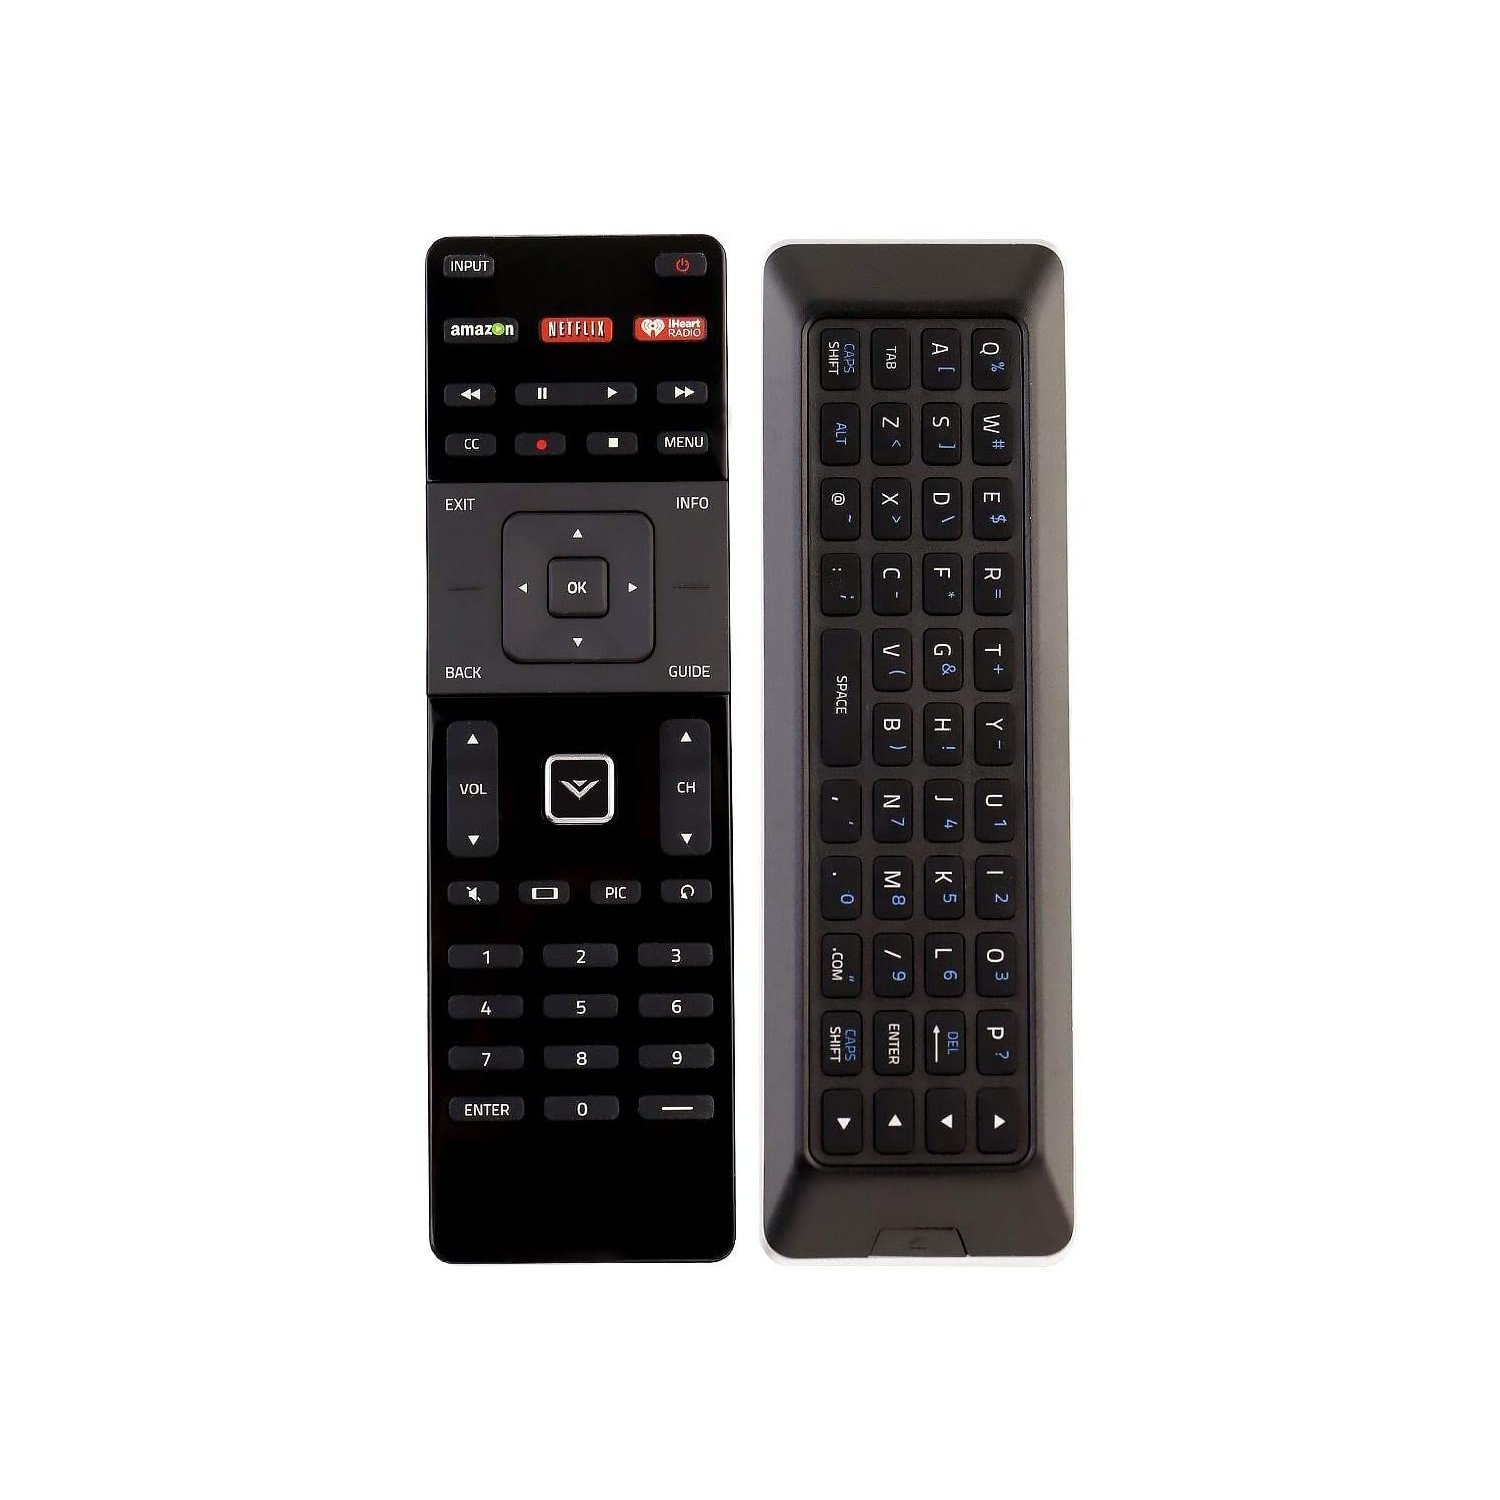 XRT500 Back Light Keyboard Remote Control fit for VIZIO Smart TV P602UI-B3 P652UI-B2 RS65-BL M602I-B3 E401i-a3 M471i-A2